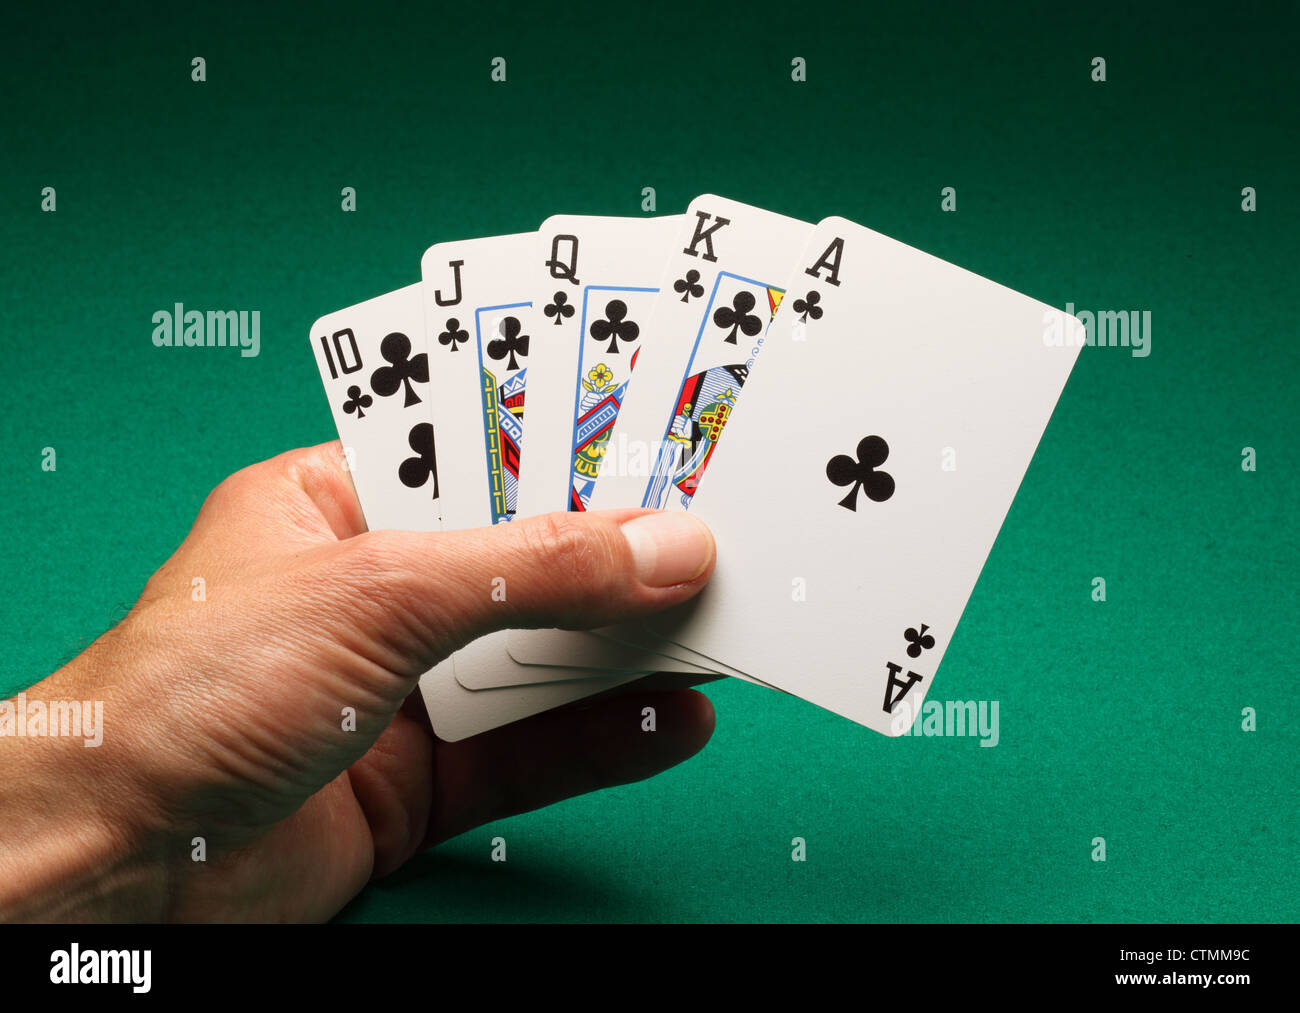 A man's hand holding playing cards on a green table. A Royal Flush of clubs in the game of Poker Stock Photo